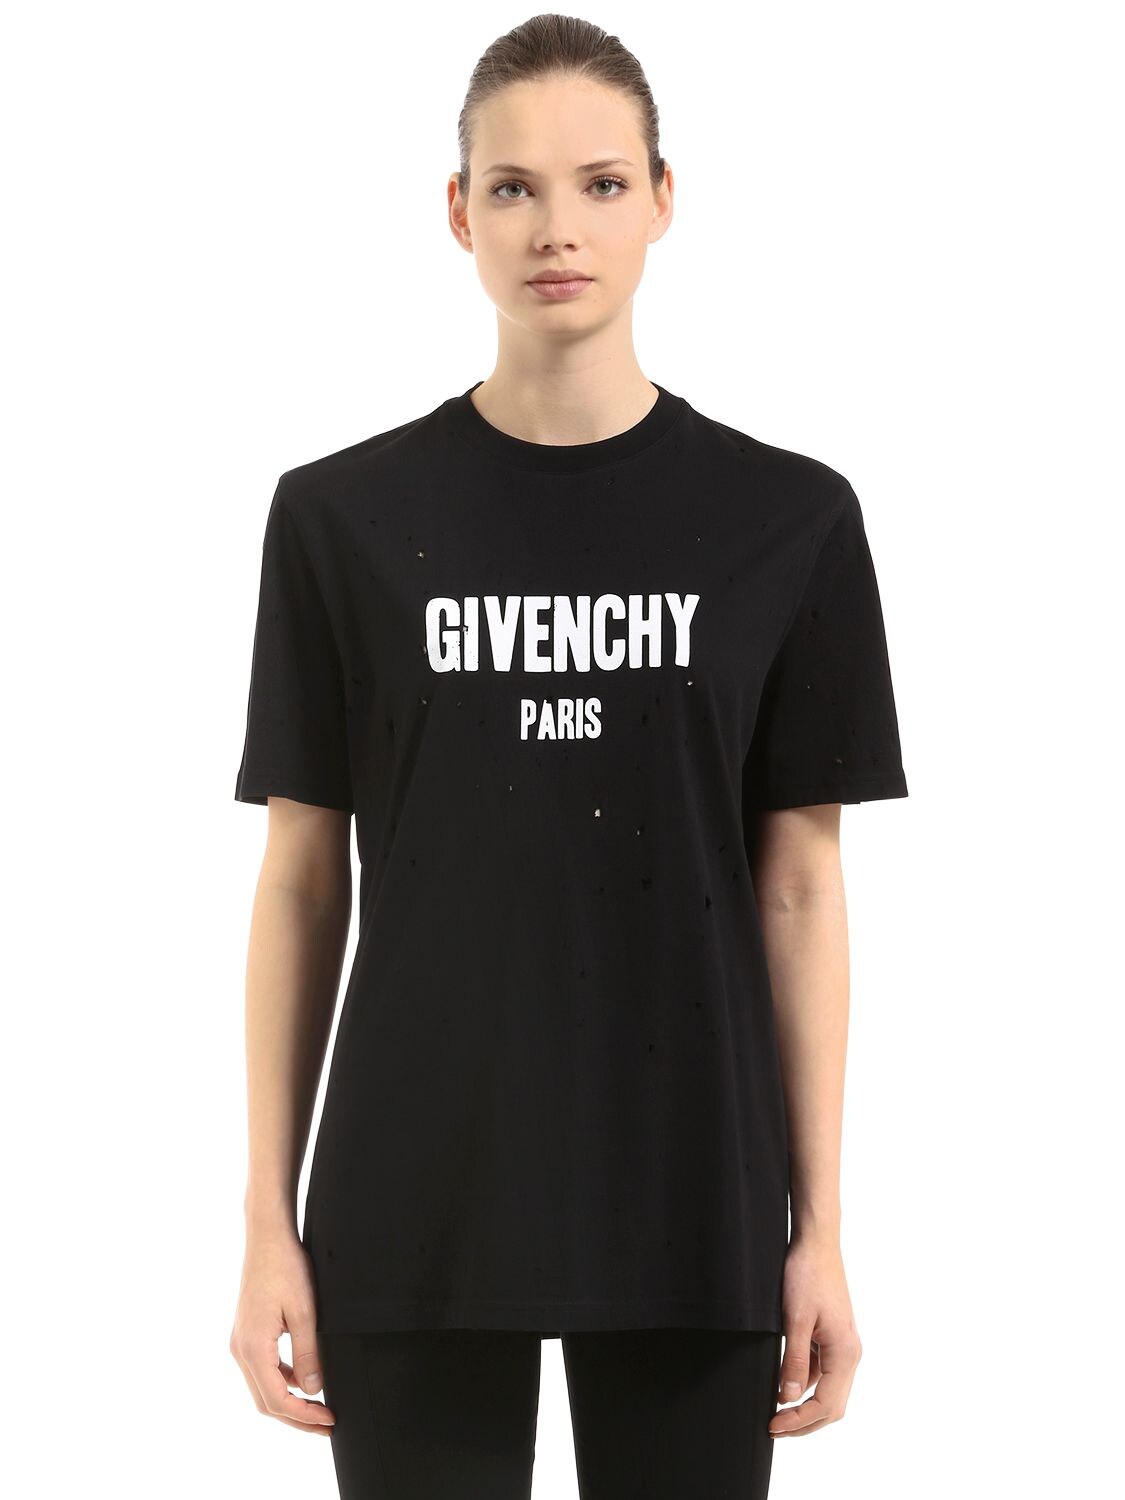 GIVENCHY LOGO PRINTED DESTROYED JERSEY T-SHIRT,67IA7M013-MDAx0